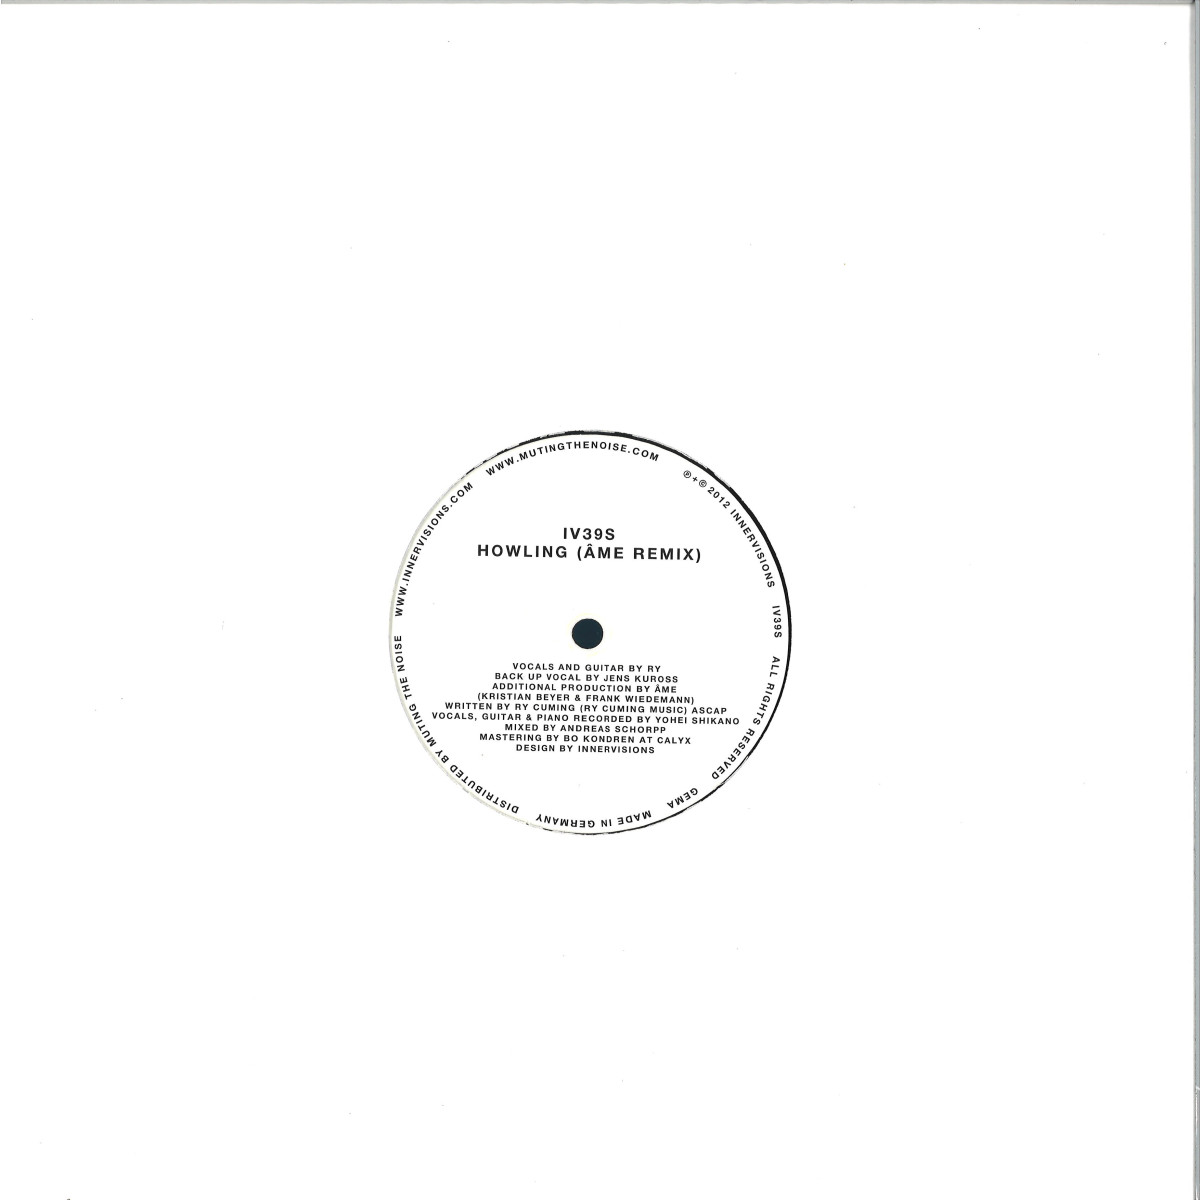 Ry / Frank Wiedemann - Howling (Ame Remix) / Innervisions IV39S - Vinyl